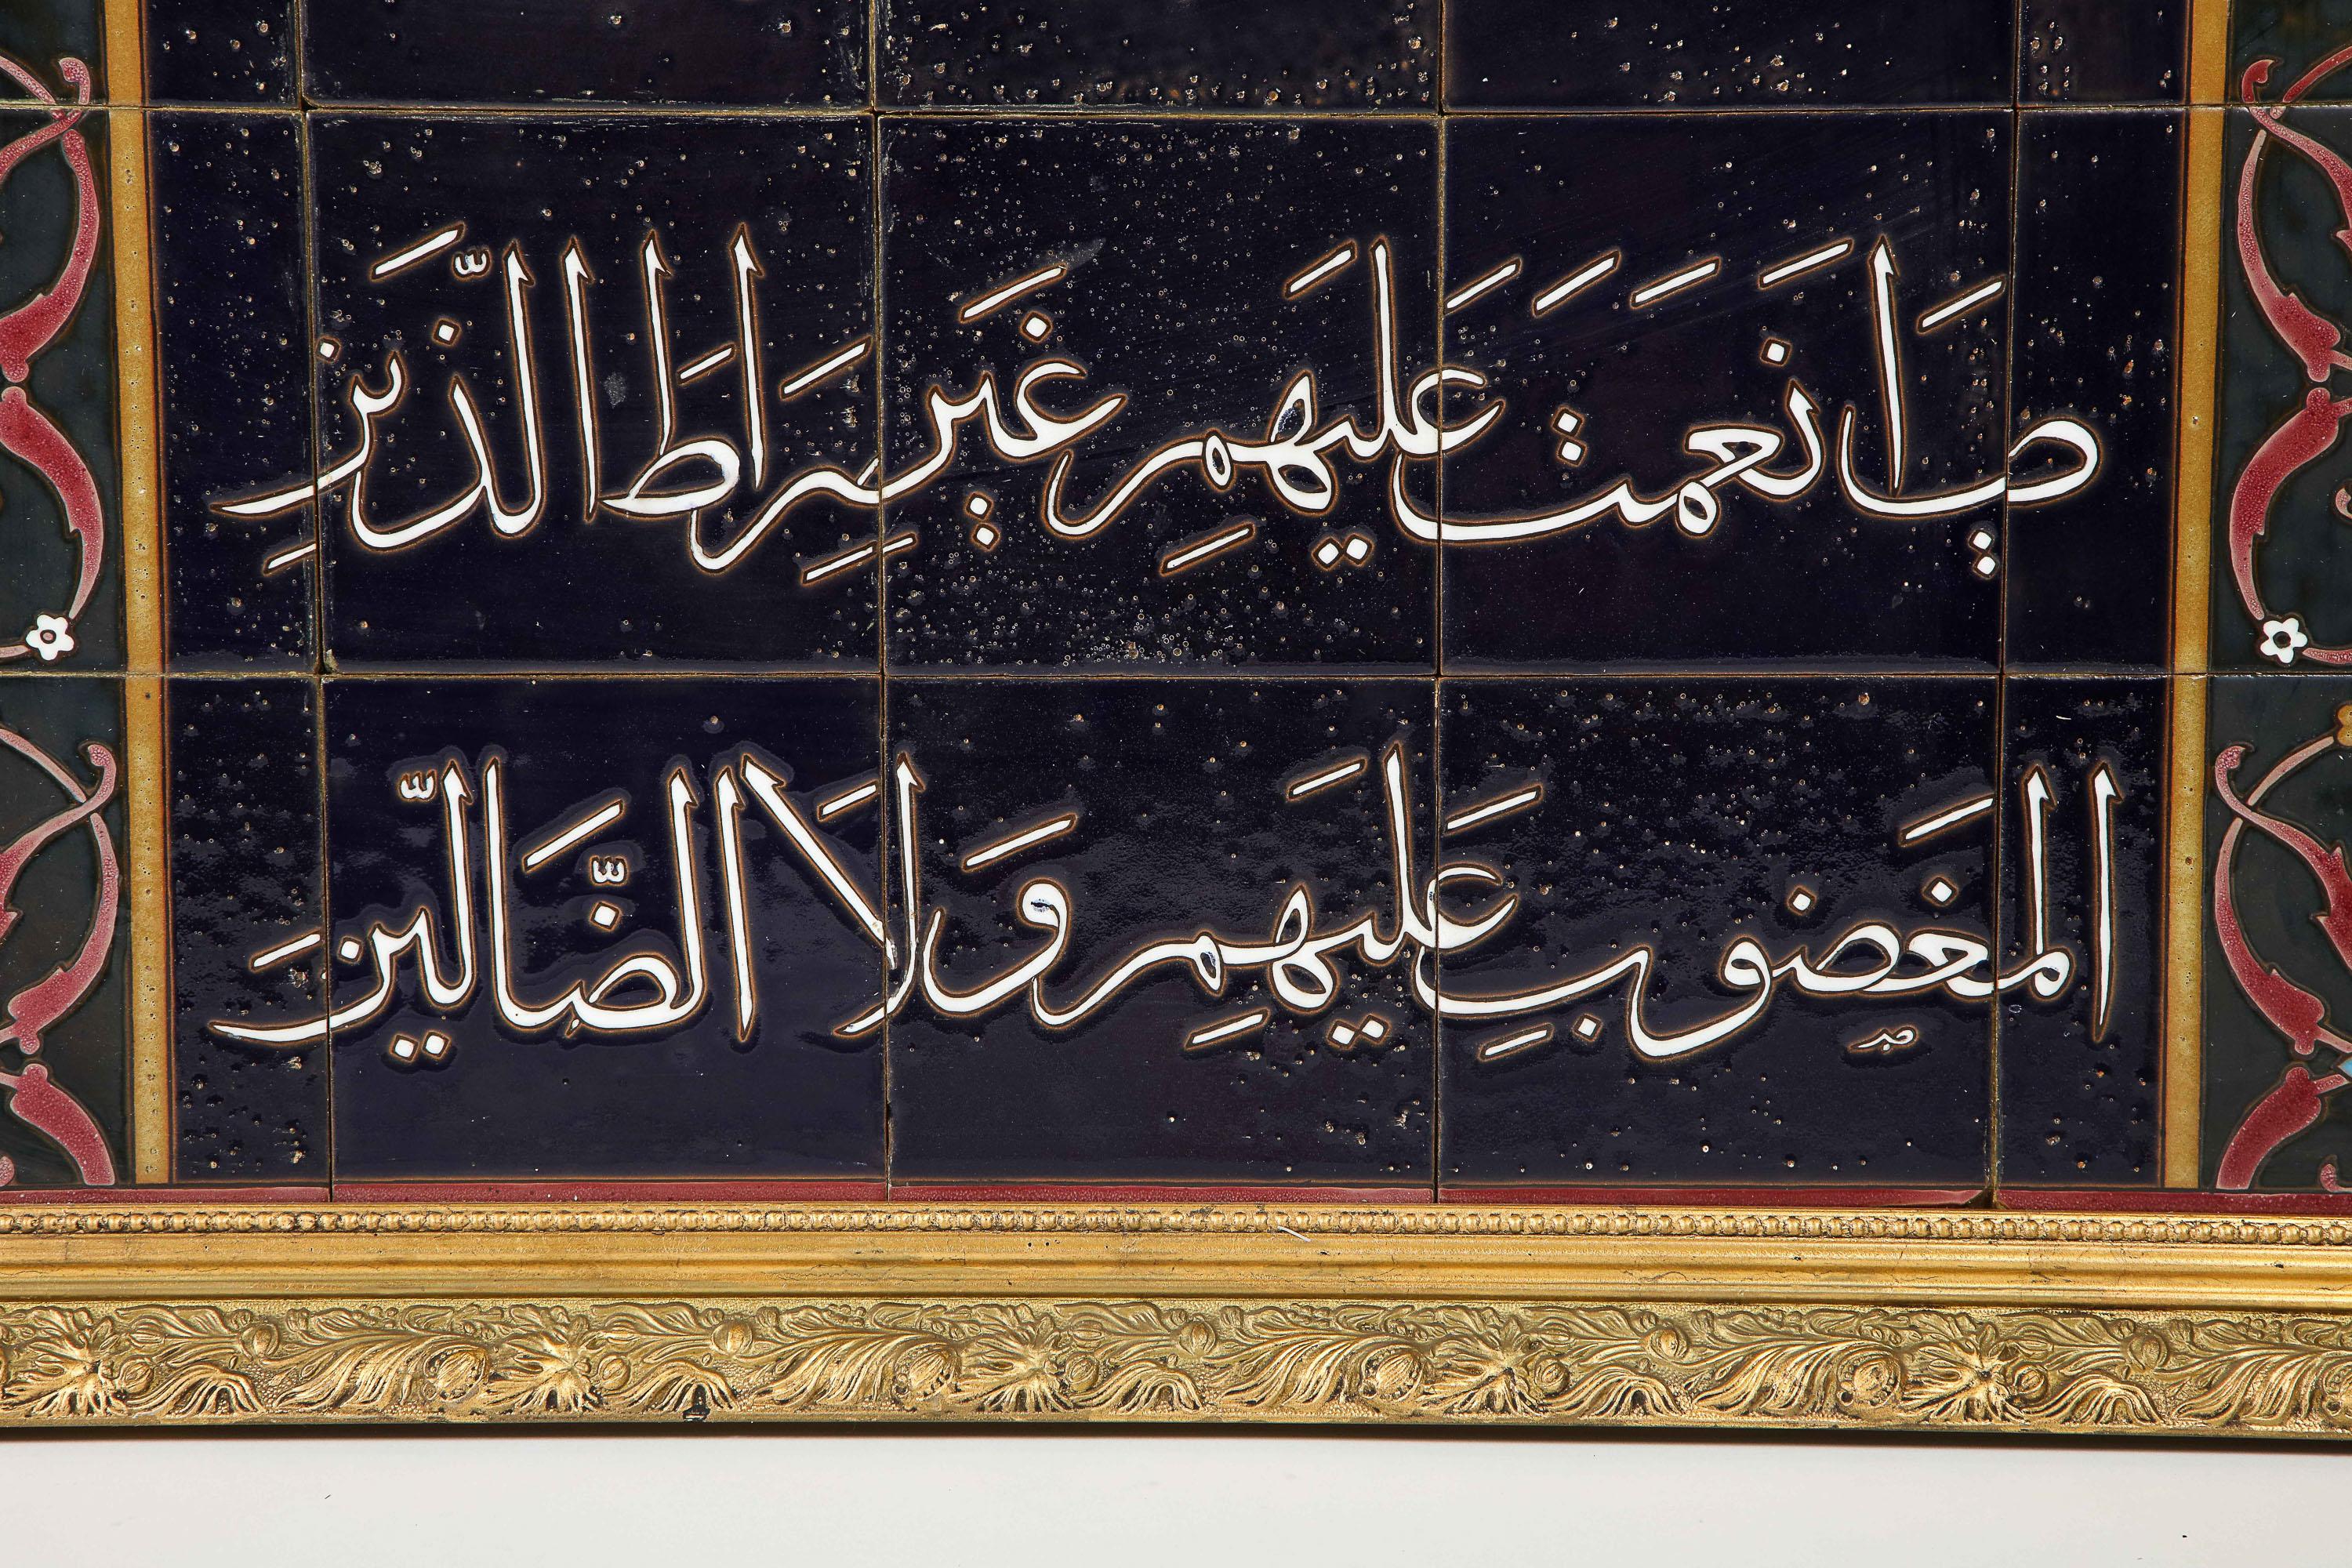 An Exceptional Pair of Islamic Middle Eastern Ceramic Tiles with Quran Verses  2